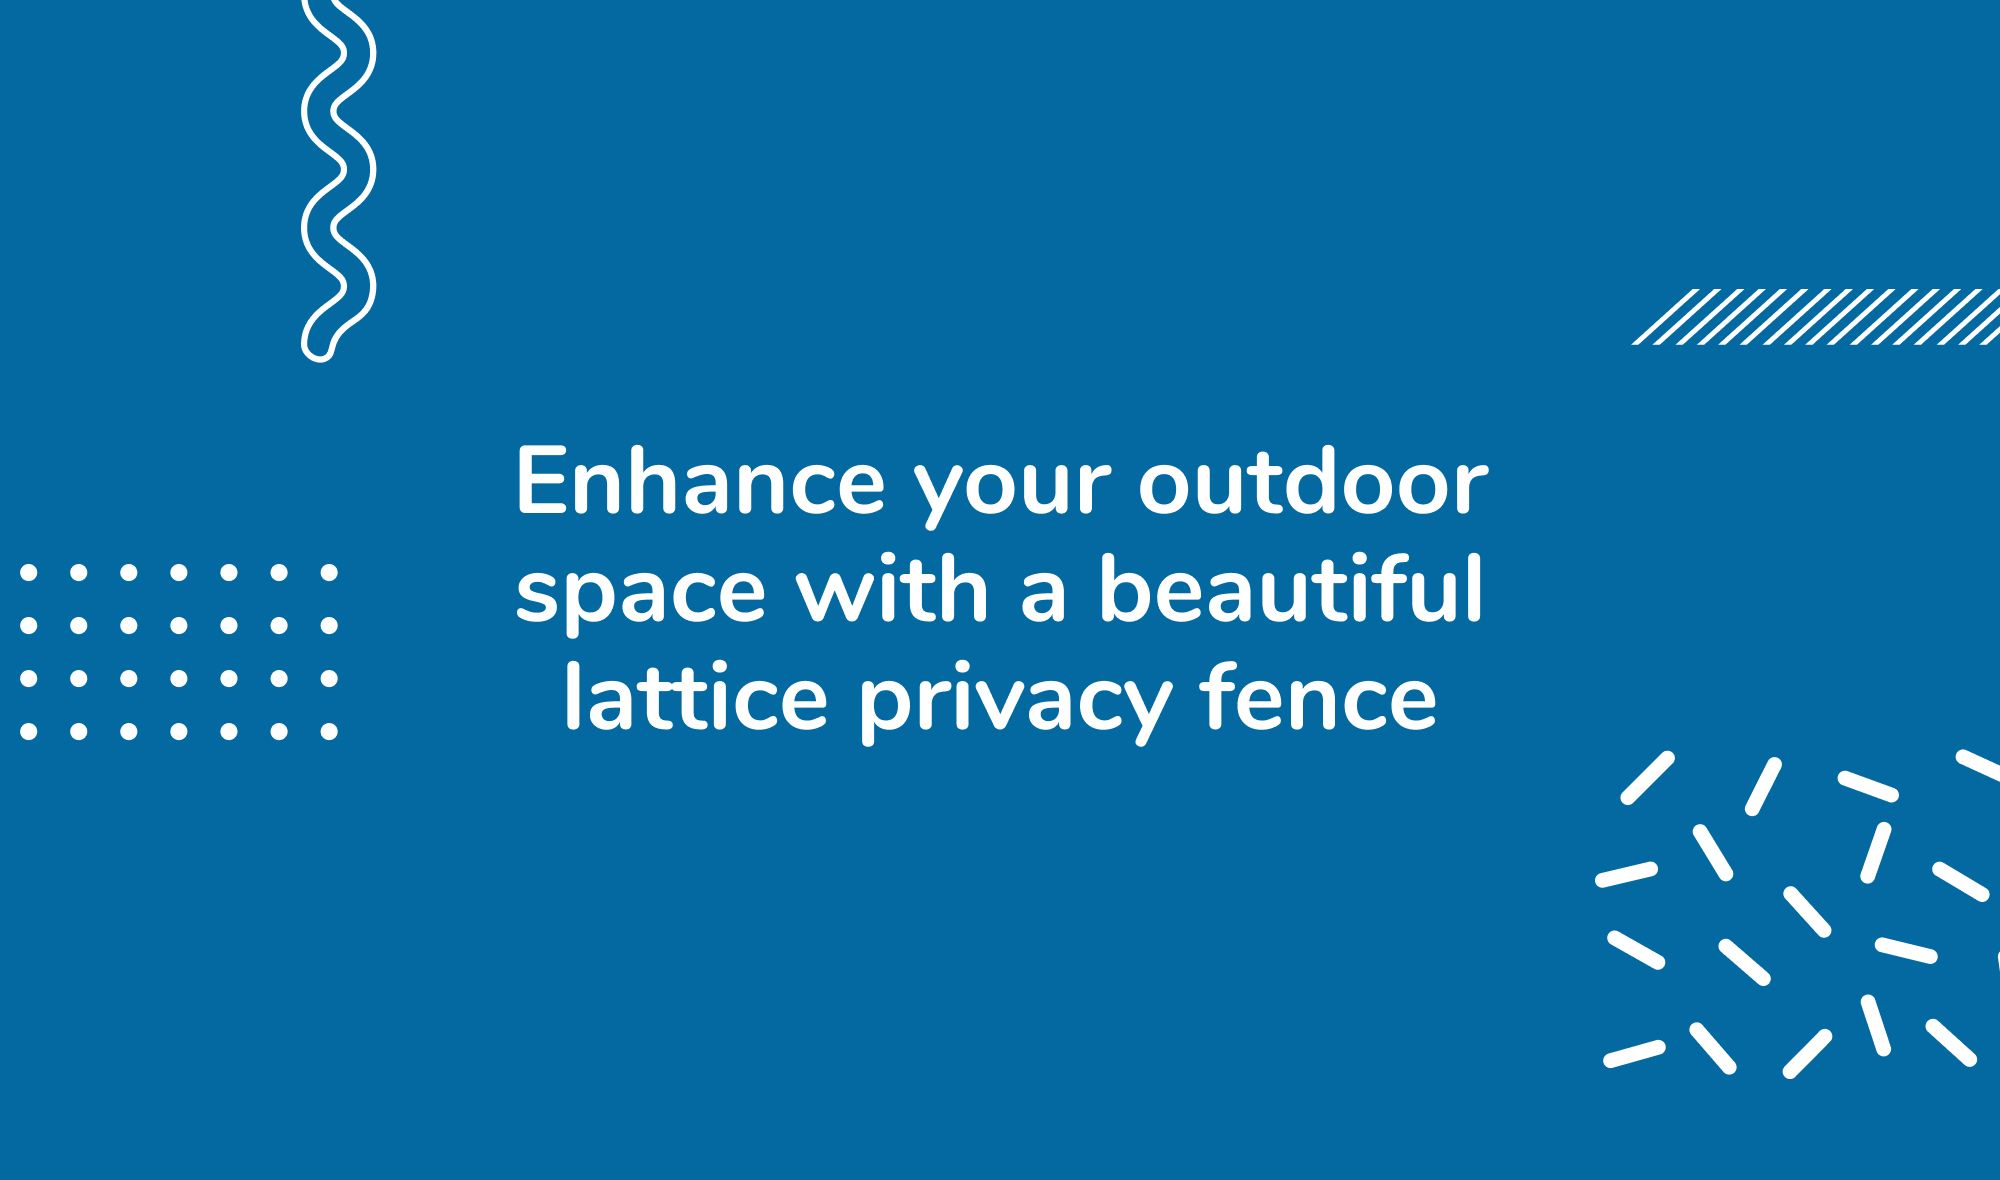 Enhance your outdoor space with a beautiful lattice privacy fence